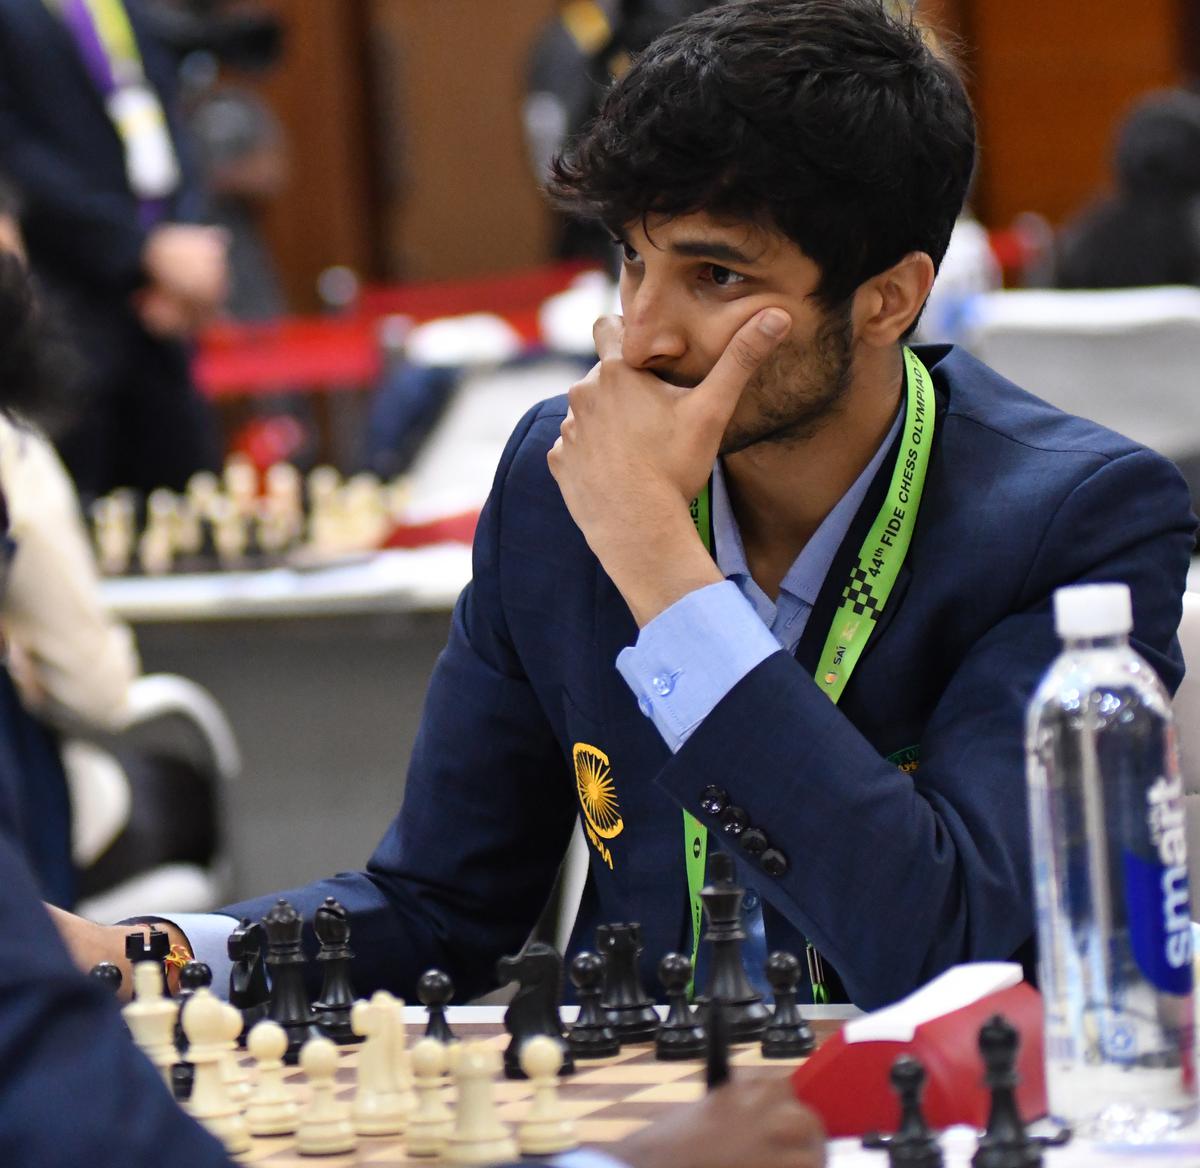 Vidit Beats Nepo; 4 Indians In World Cup Quarterfinals 